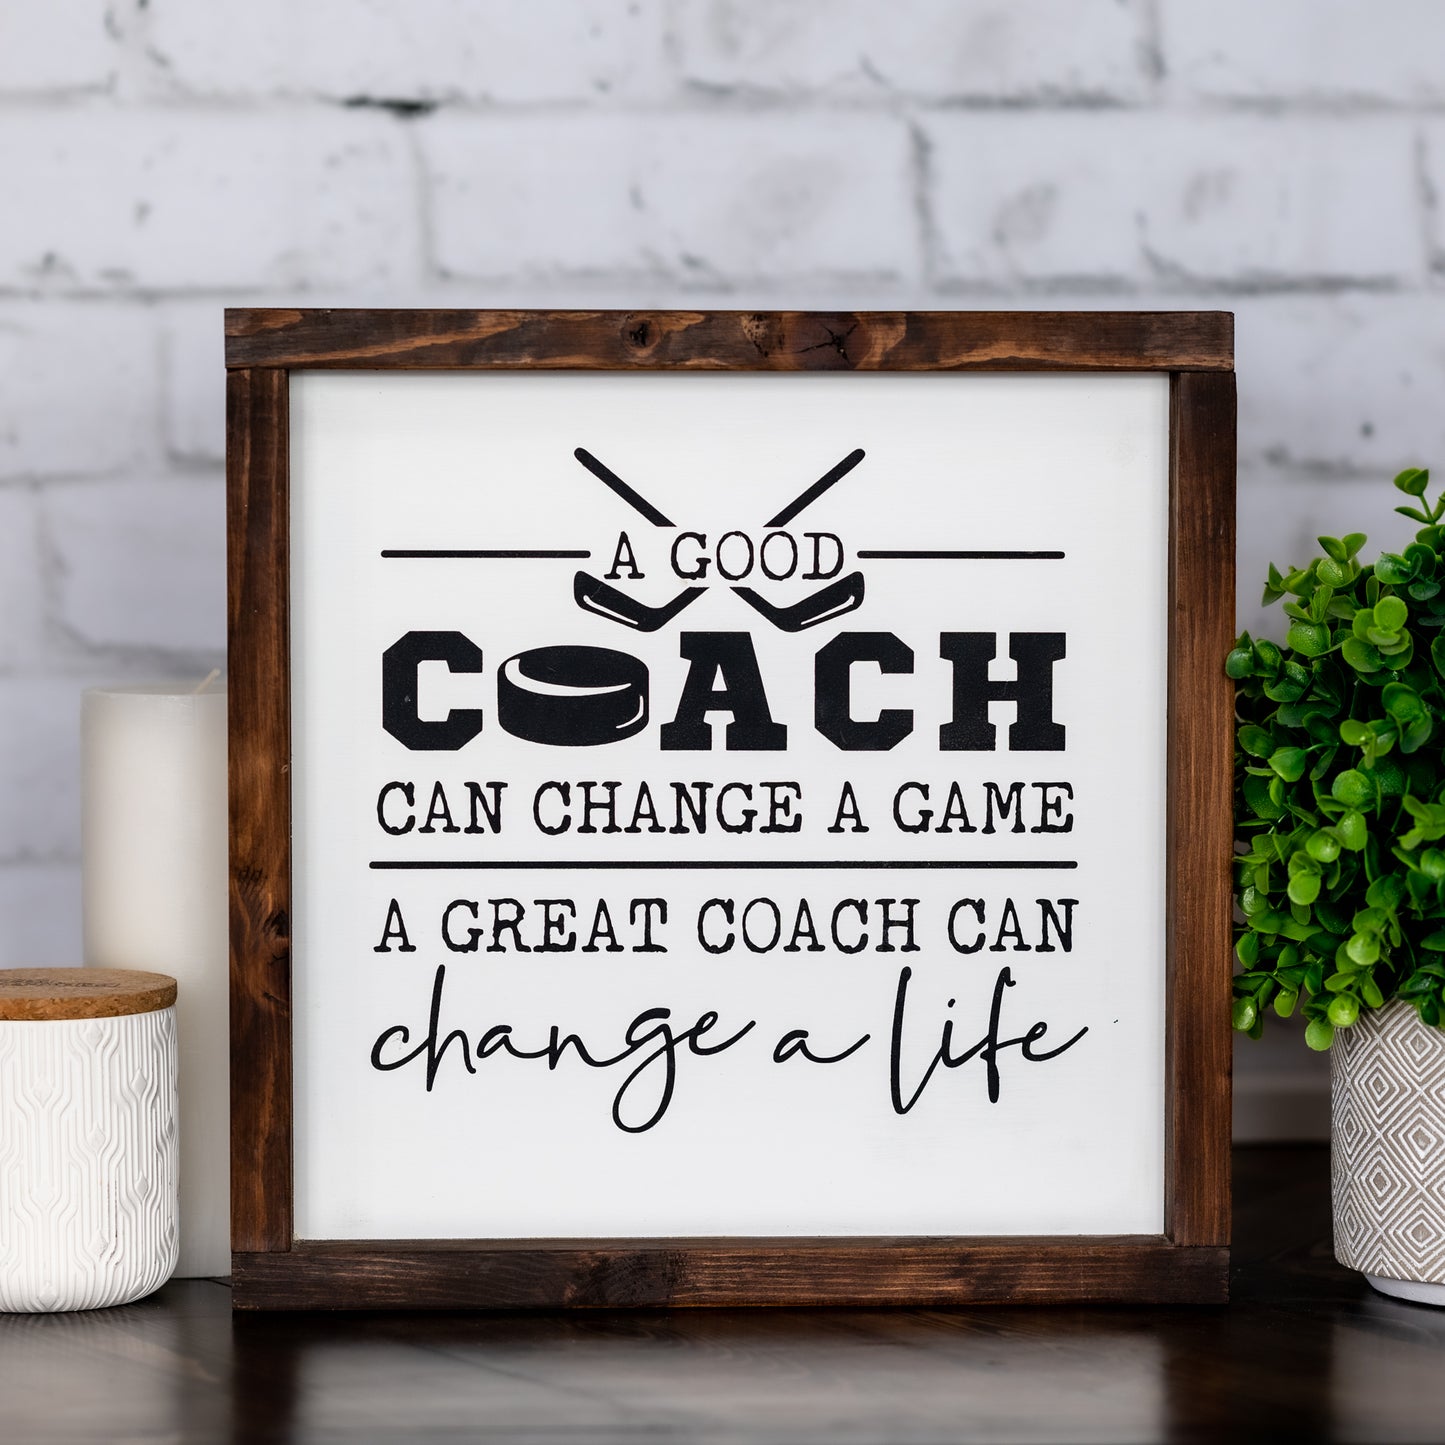 a good coach can change a game, a great coach can change a life ~ wood sign